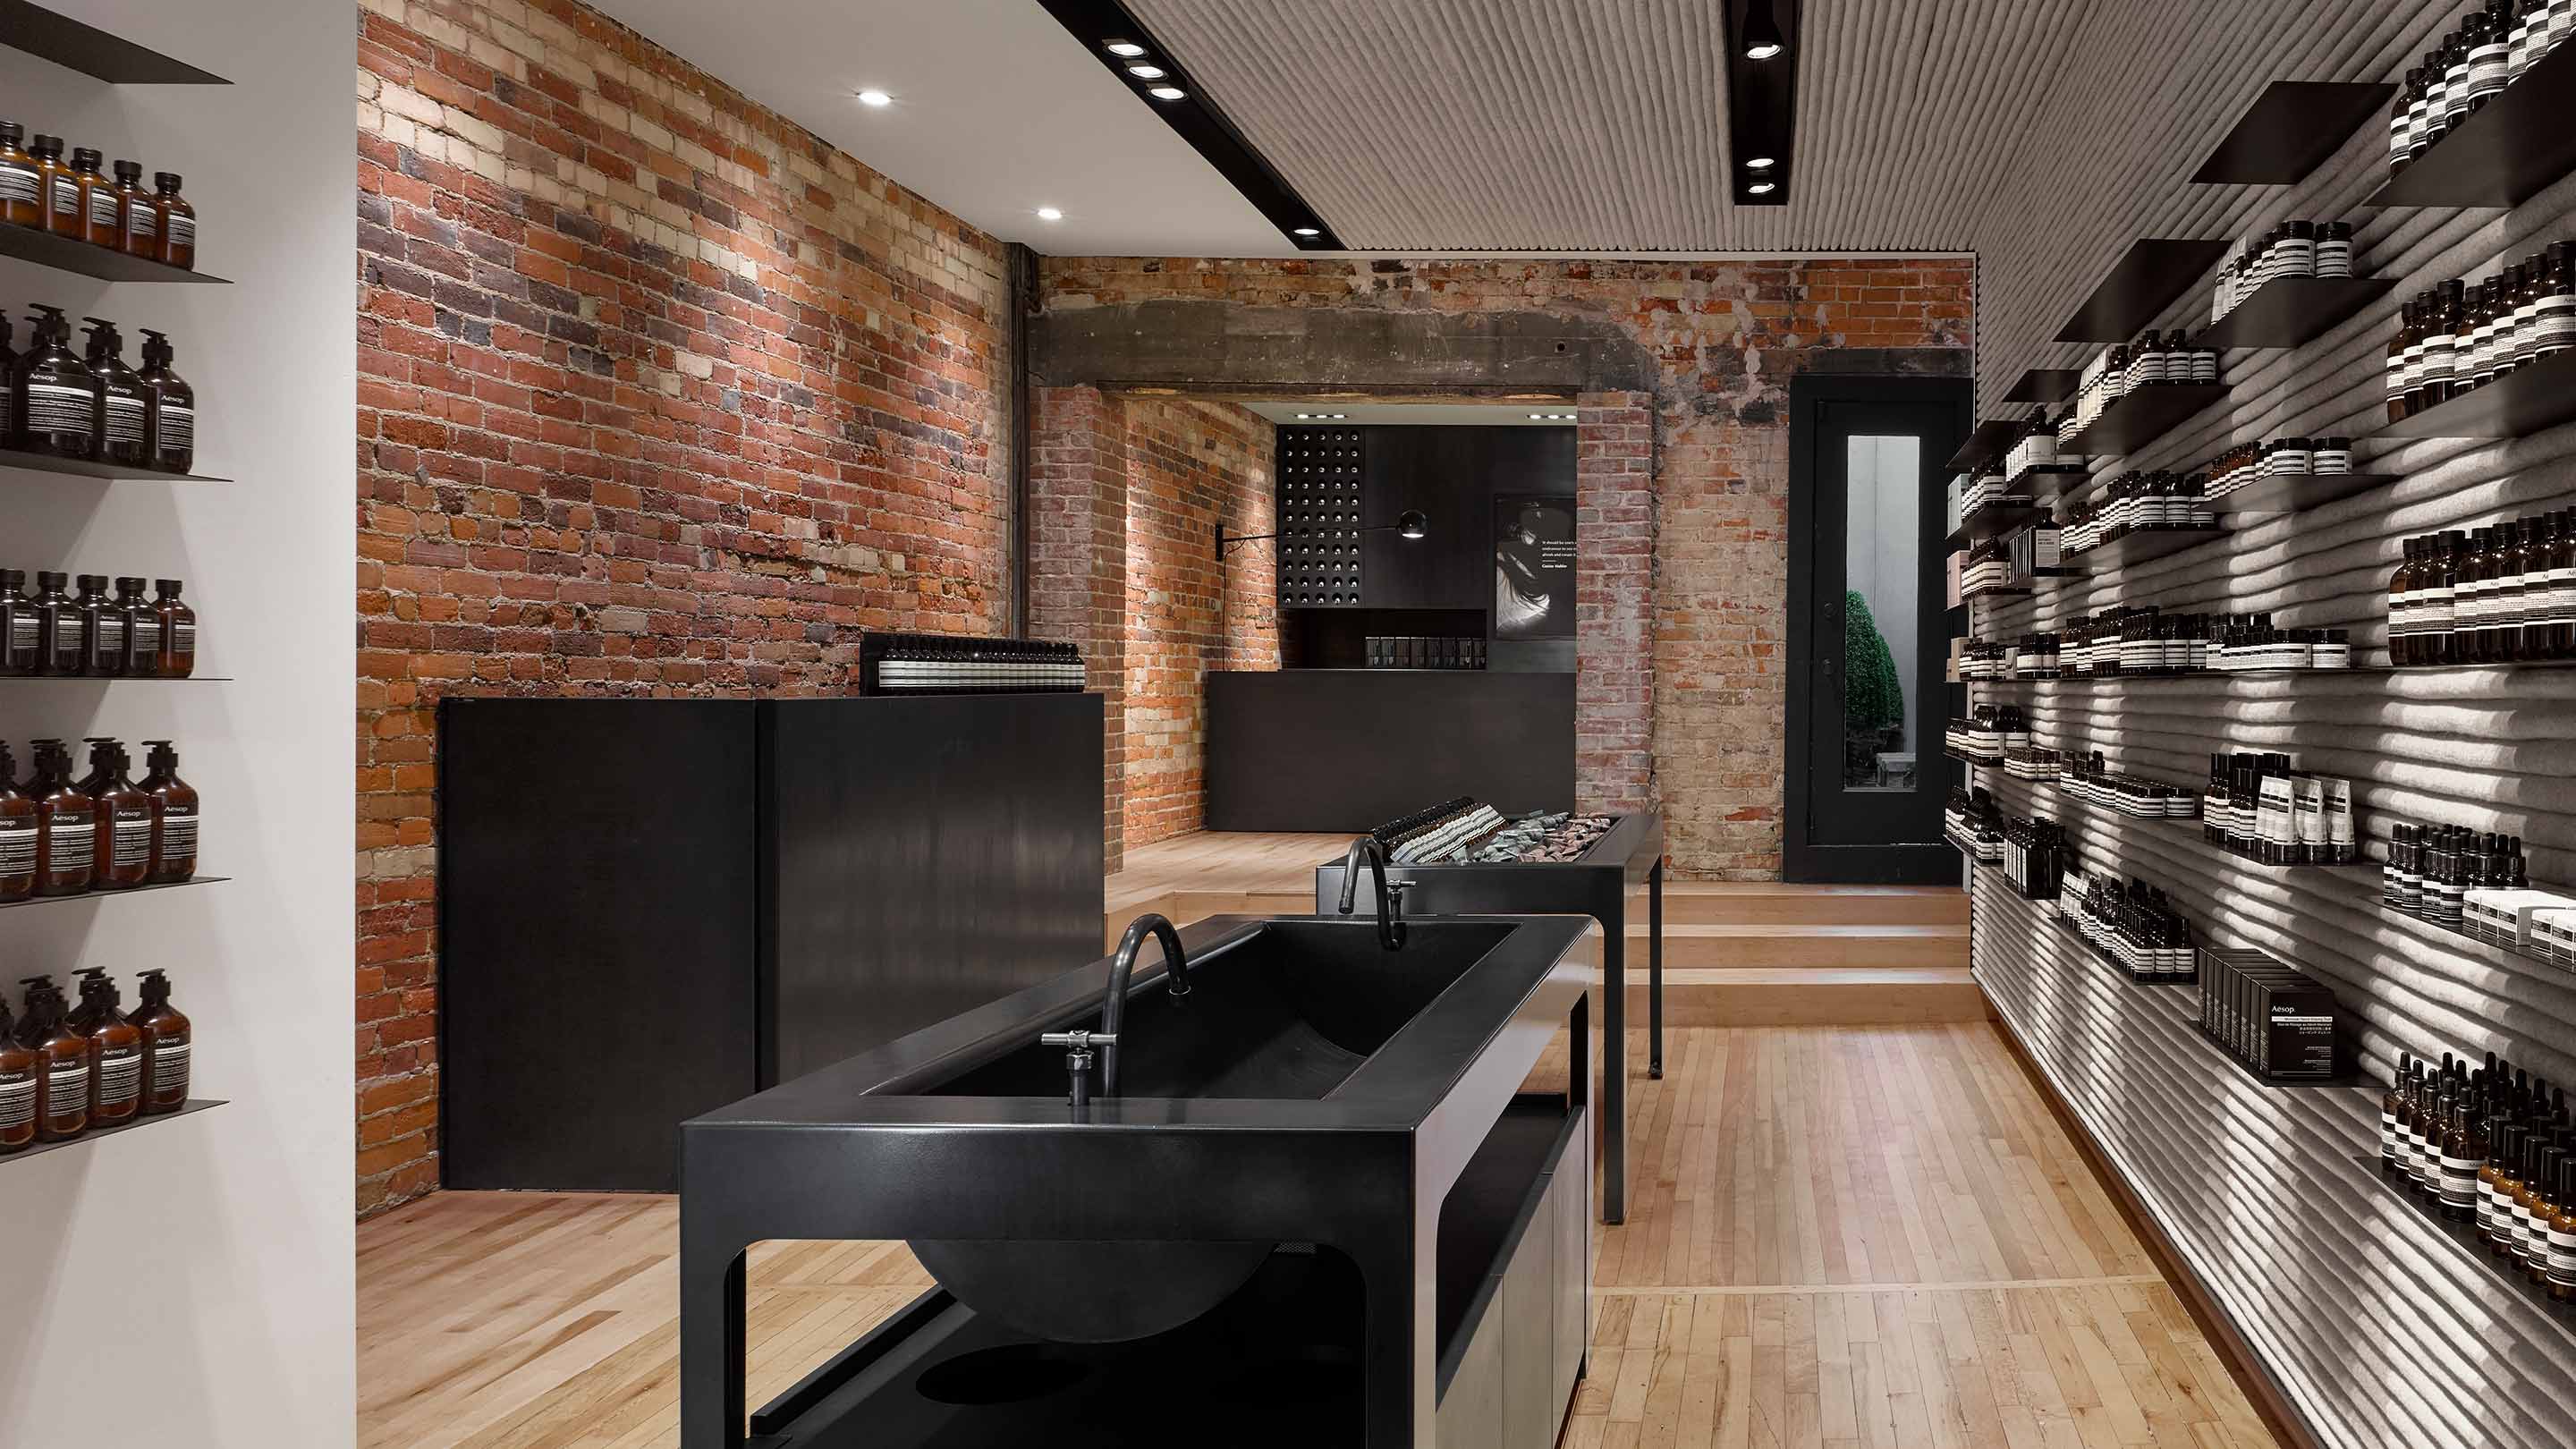 Smooth blackened steel sinks sit in the middle of a narrow store interior; contrasting with industrial textured brick walls and shelves holding Aesop Product.